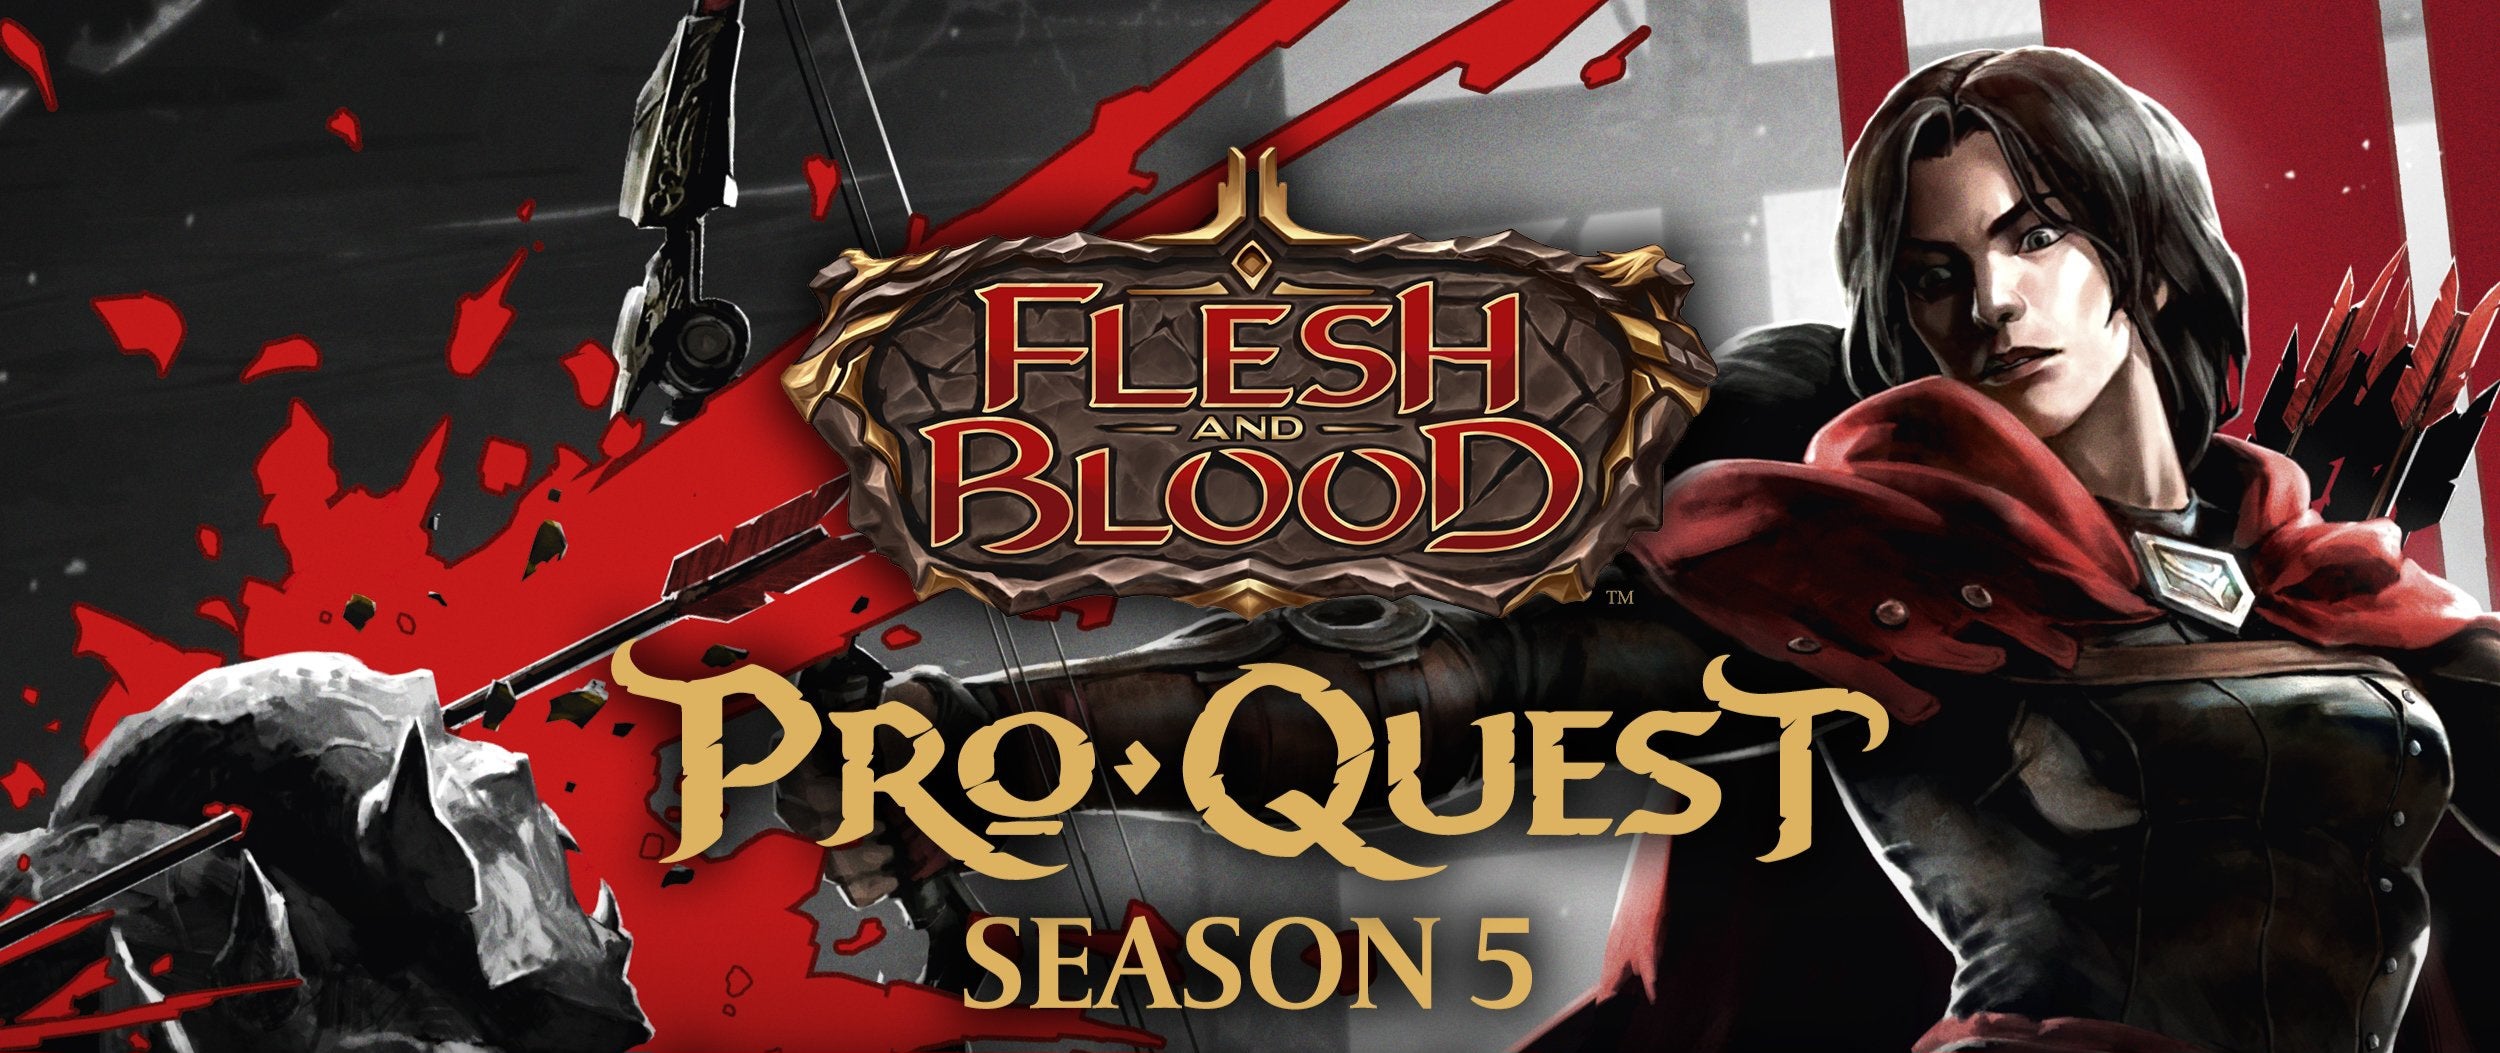 Flesh and Blood - ProQuest Season 5 - 14 avril / April 14th | Boutique FDB